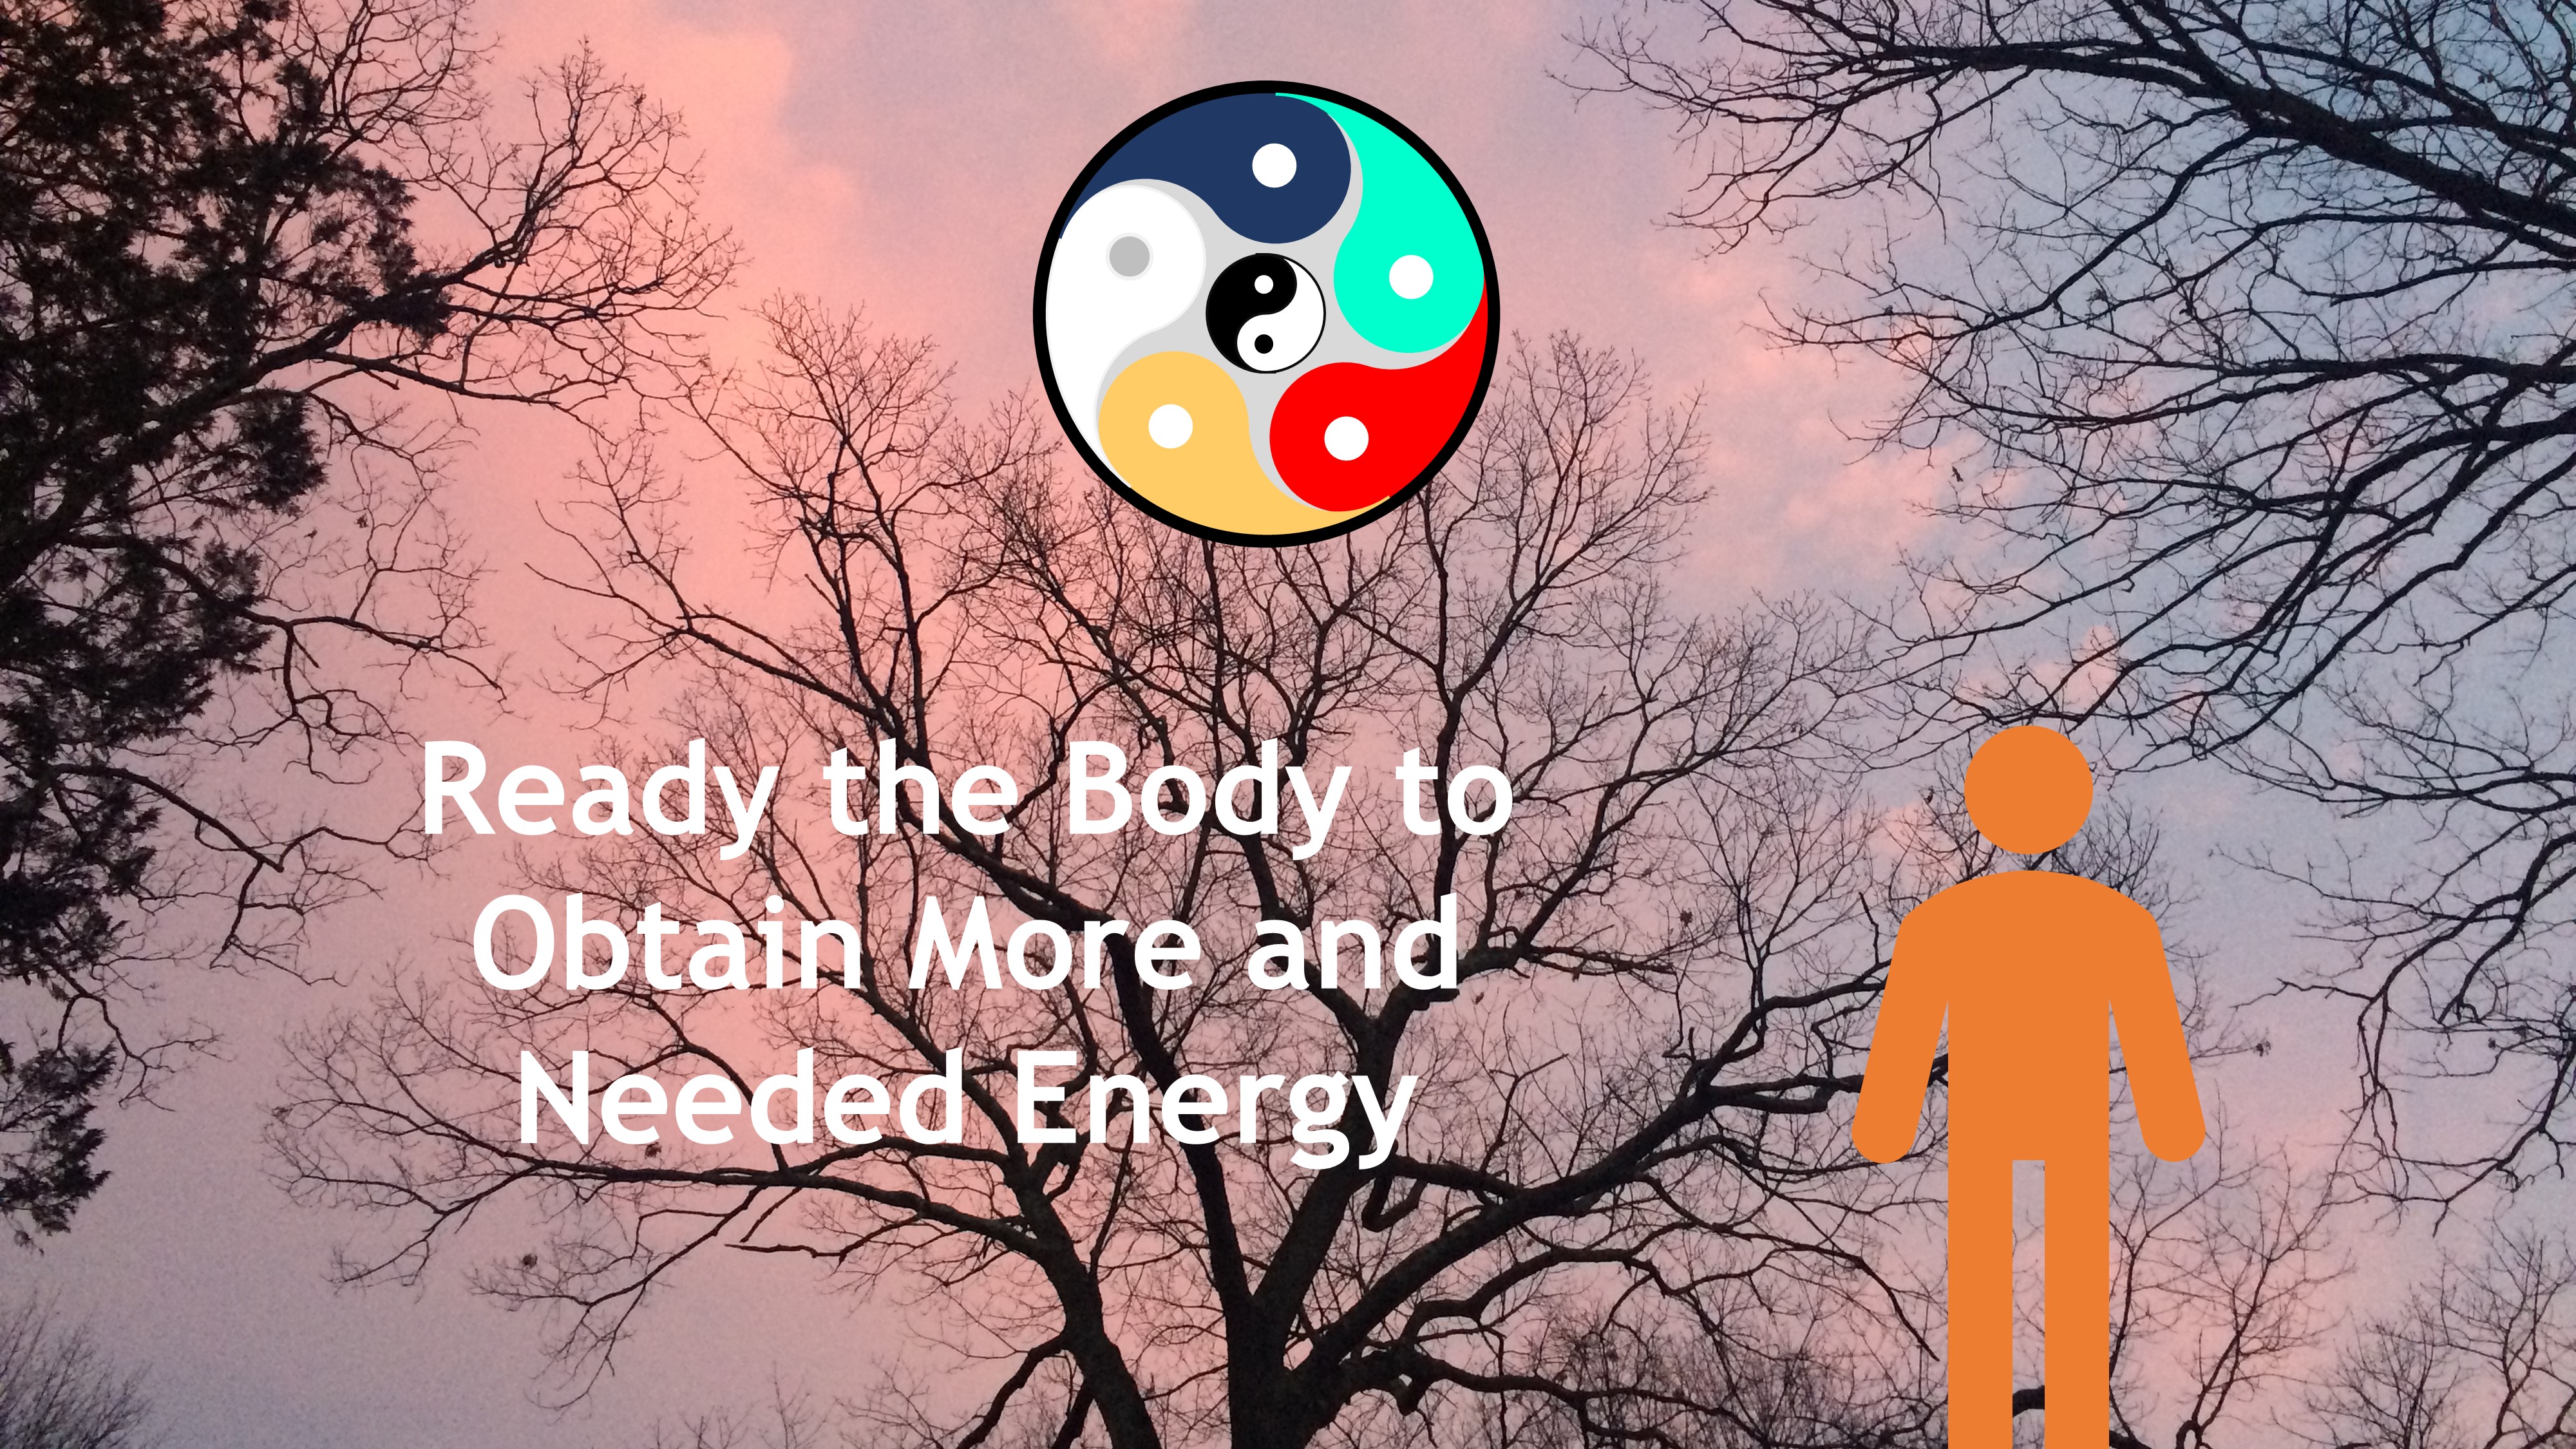 Ready the Bosy to Obtain More and Needed Energy